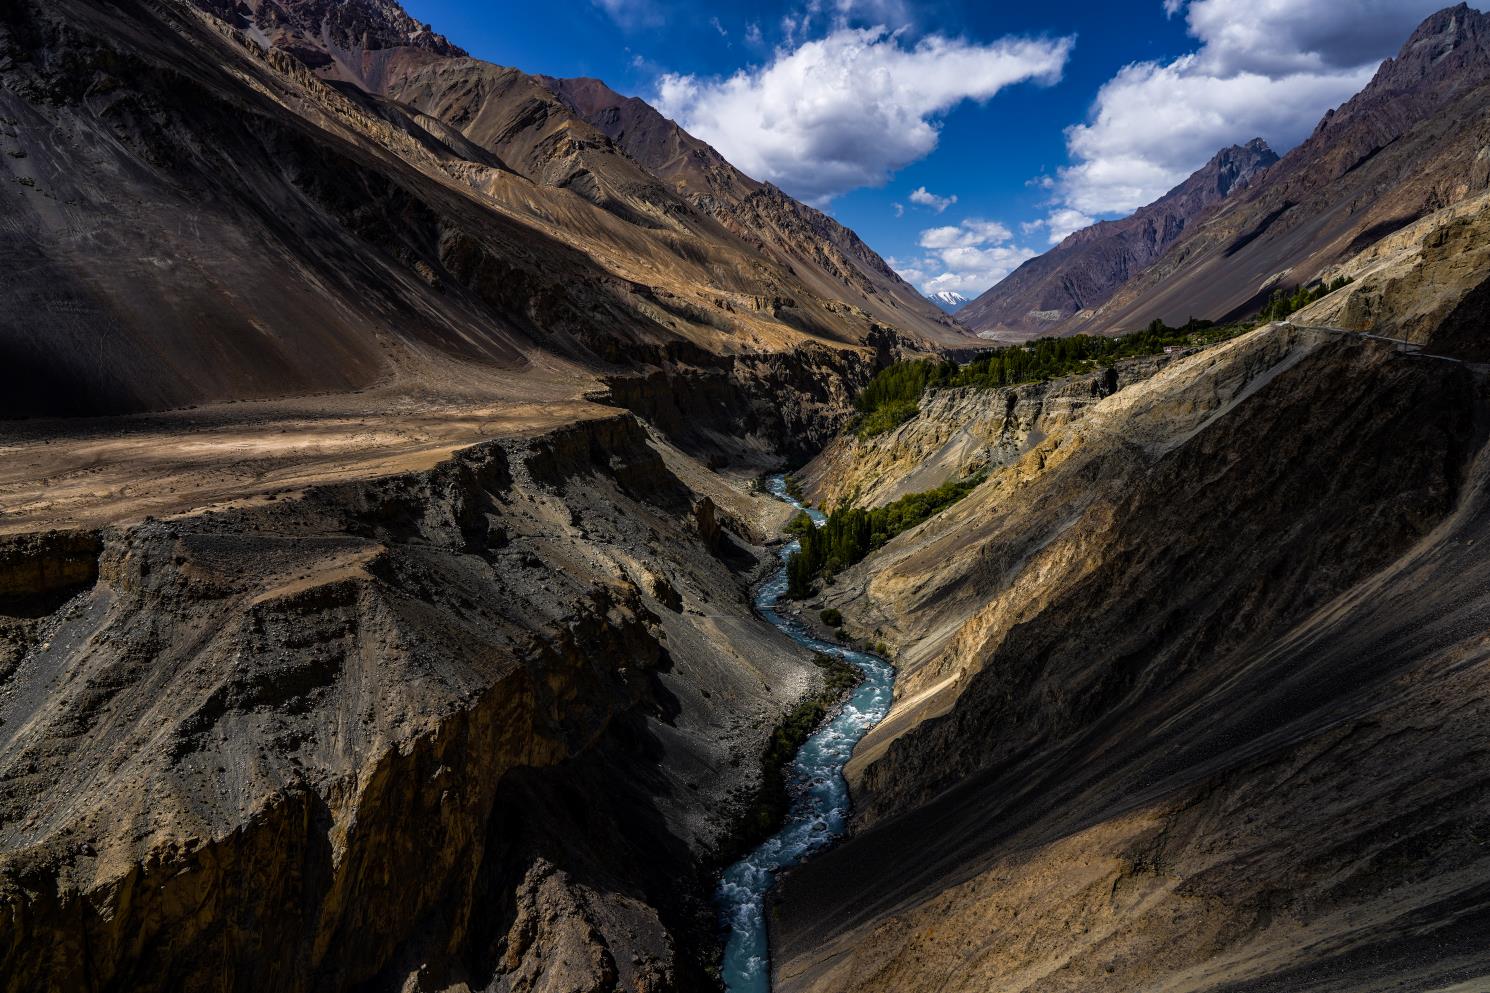 bright blue river snaking through a dry rocky gorge in a remote valley in northern pakistan